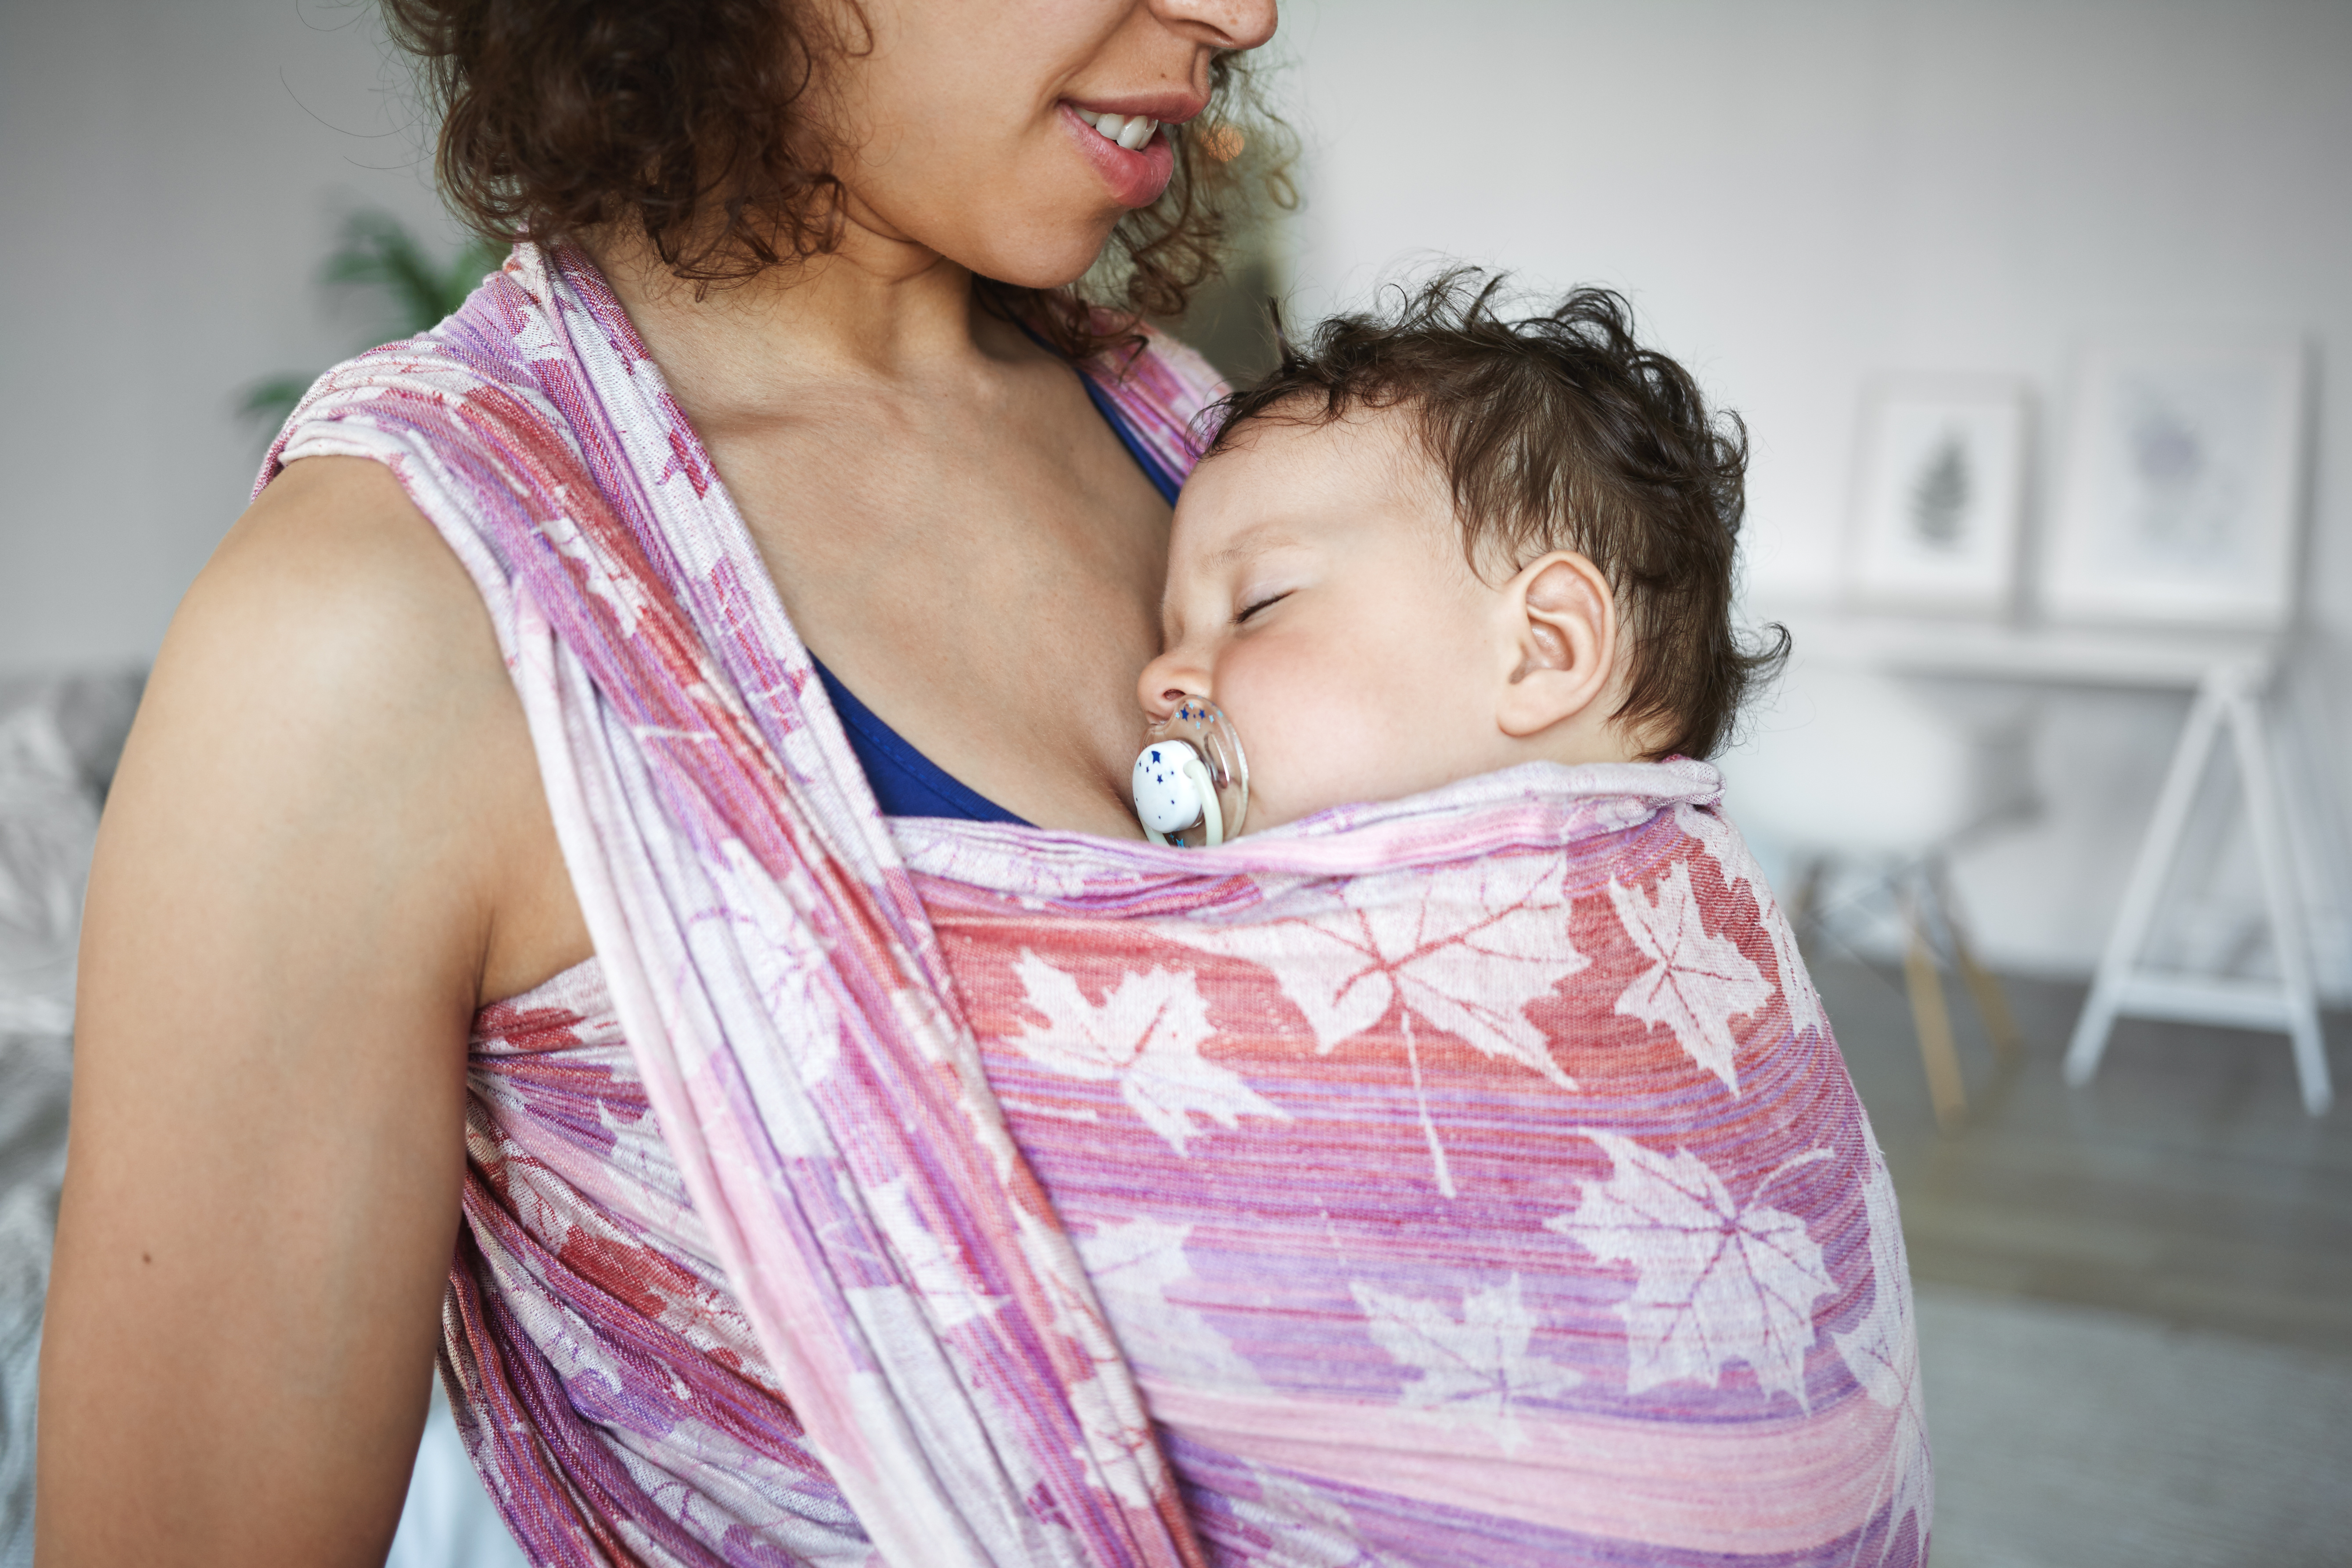 A parent wears their sleeping baby in a sling.